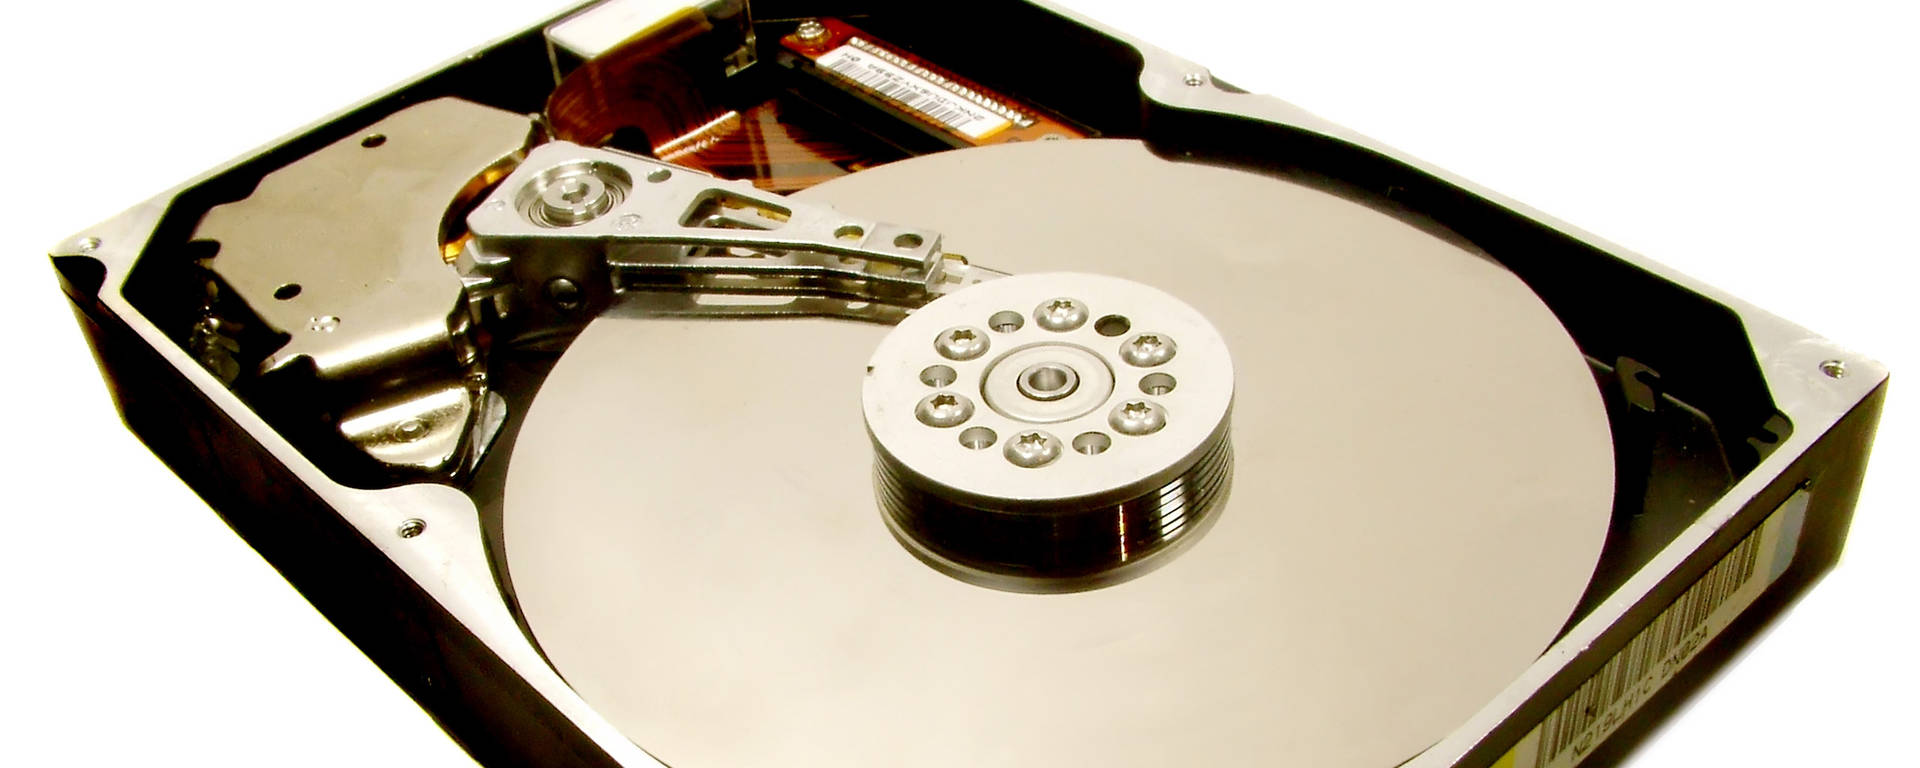 Hard Drive Pictures Wallpaper